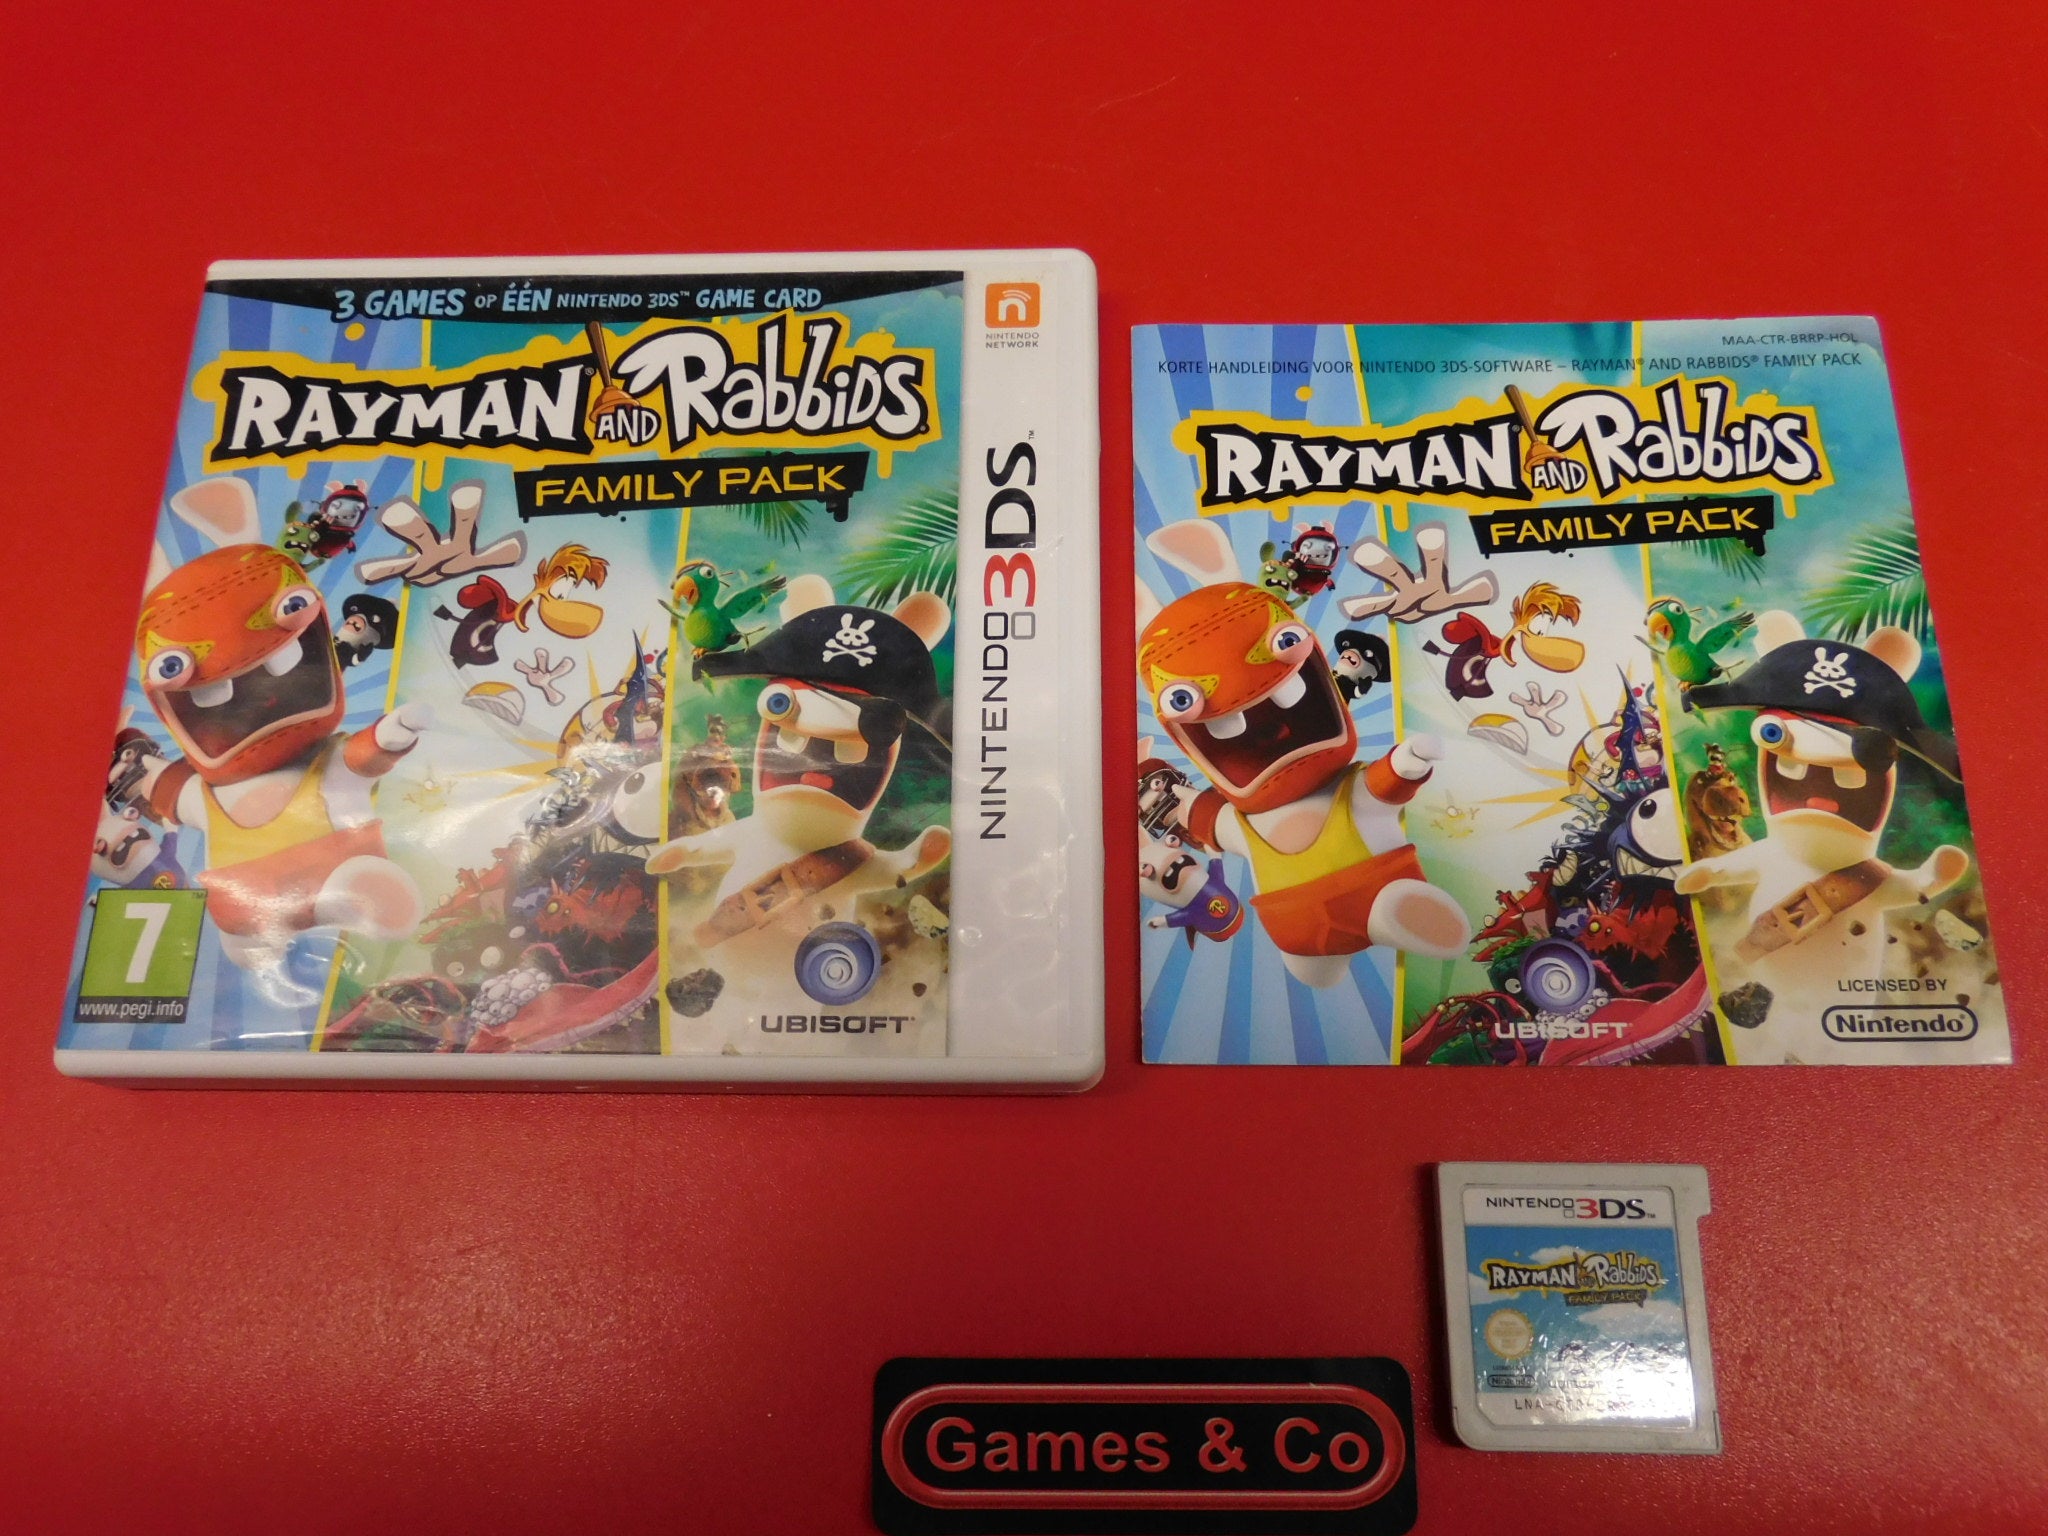 RAYMAN AND RABBIDS FAMILY PACK